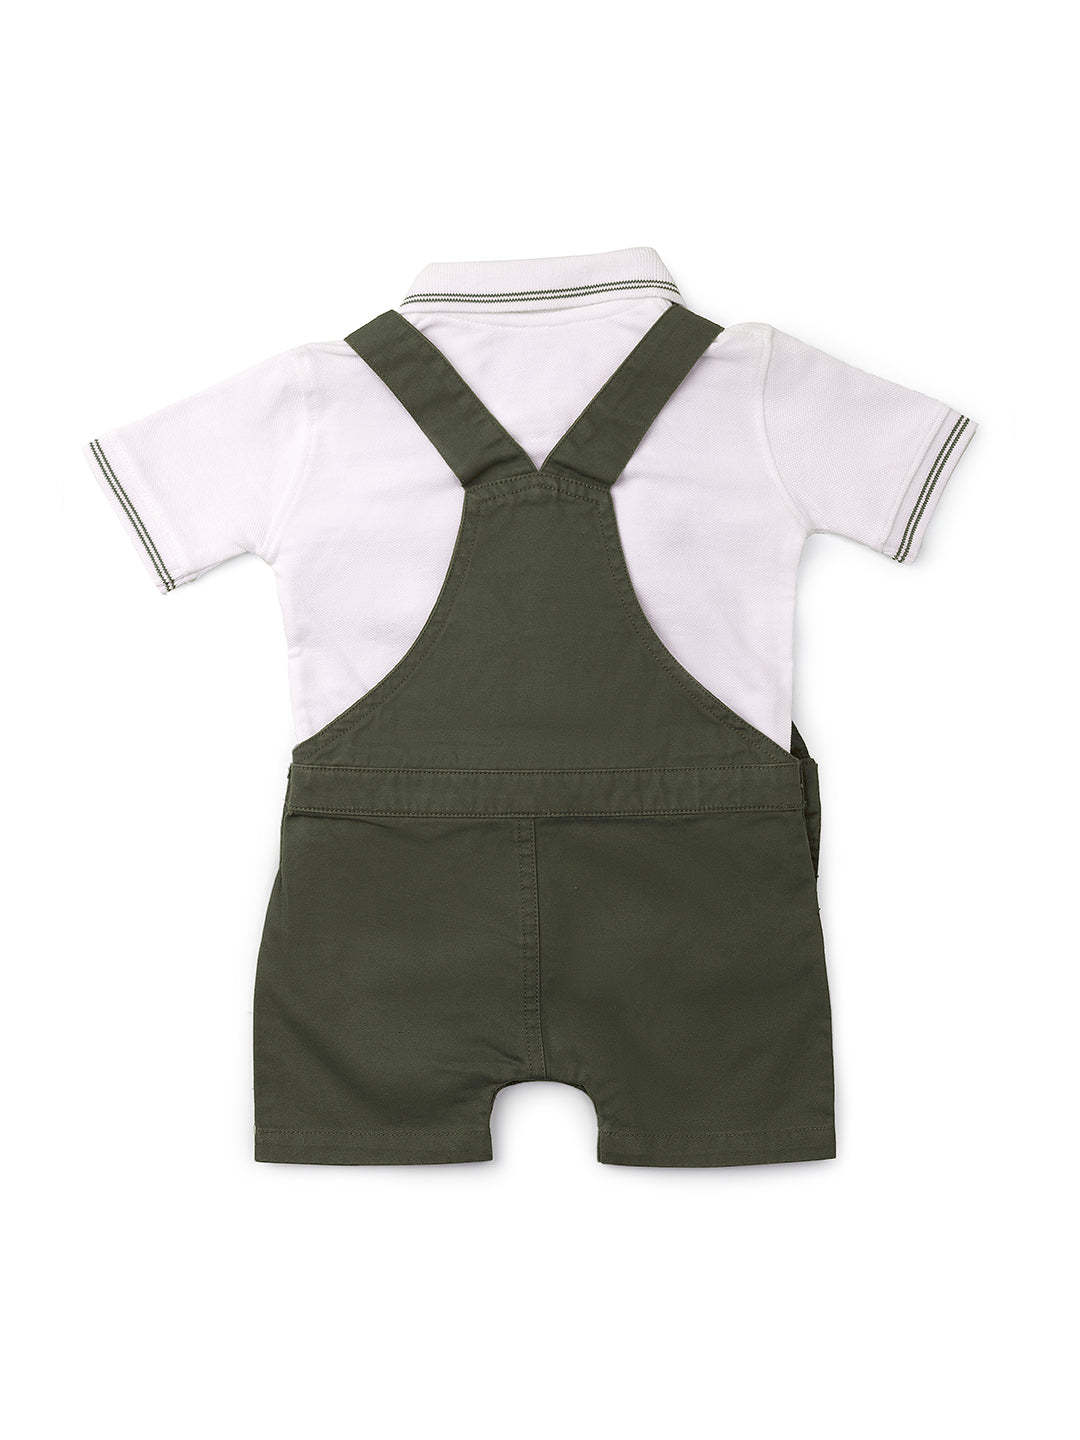 Nuberry Baby Boys Half Sleeves Dungaree Set - Olive Green